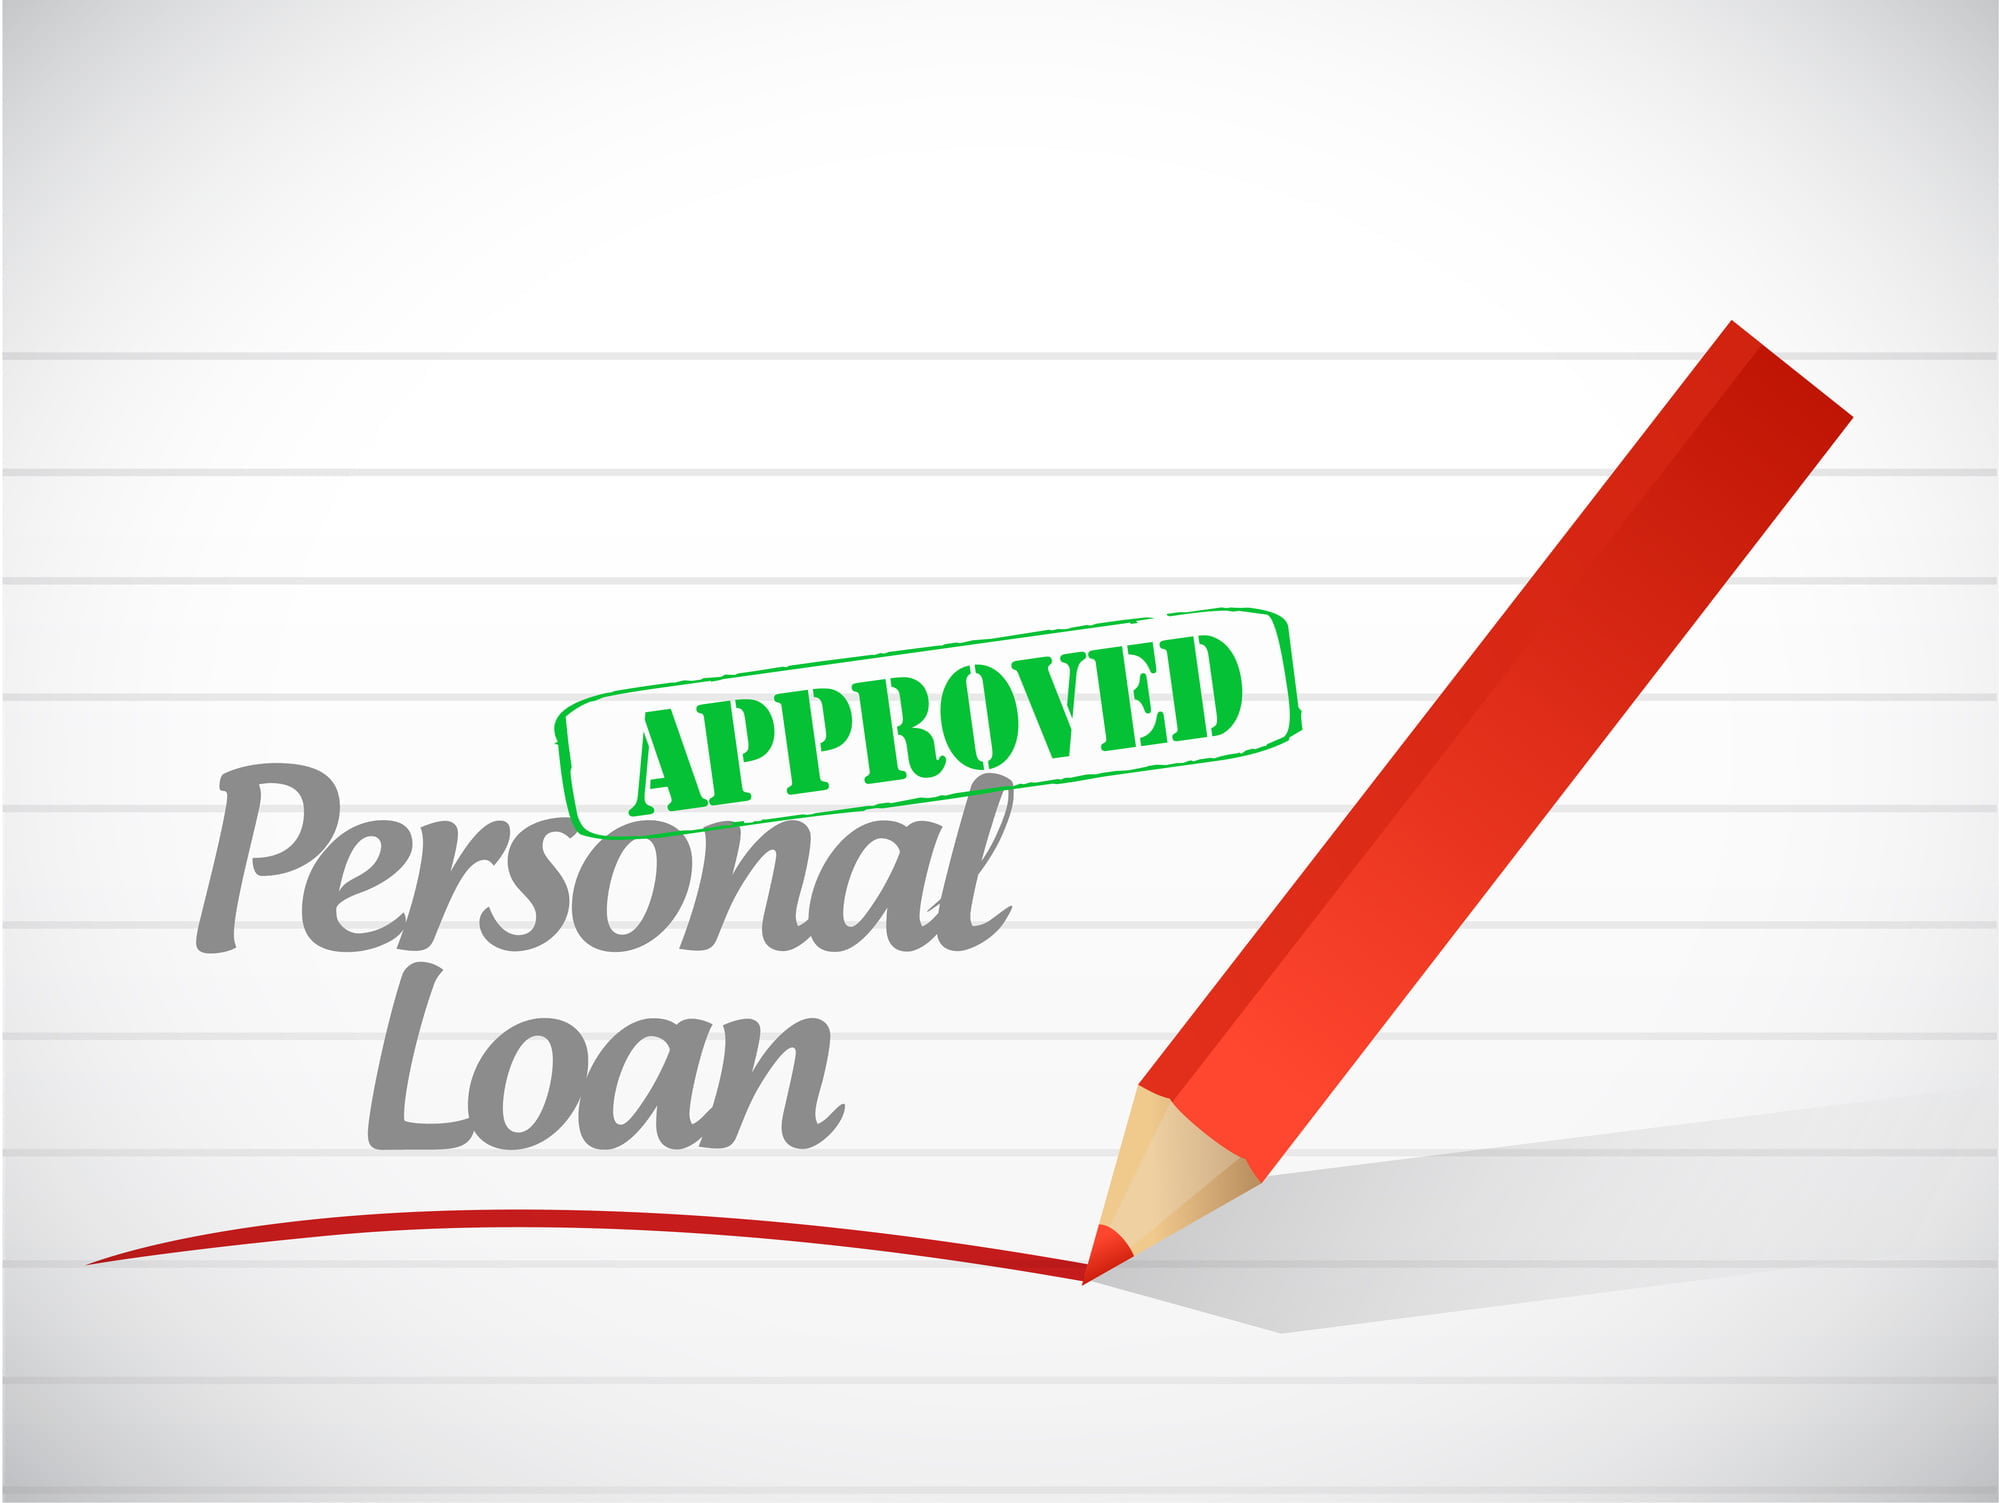 Preparing personal loan documents the correct way will help ensure your loan process is easy, and that your loan gets approved.